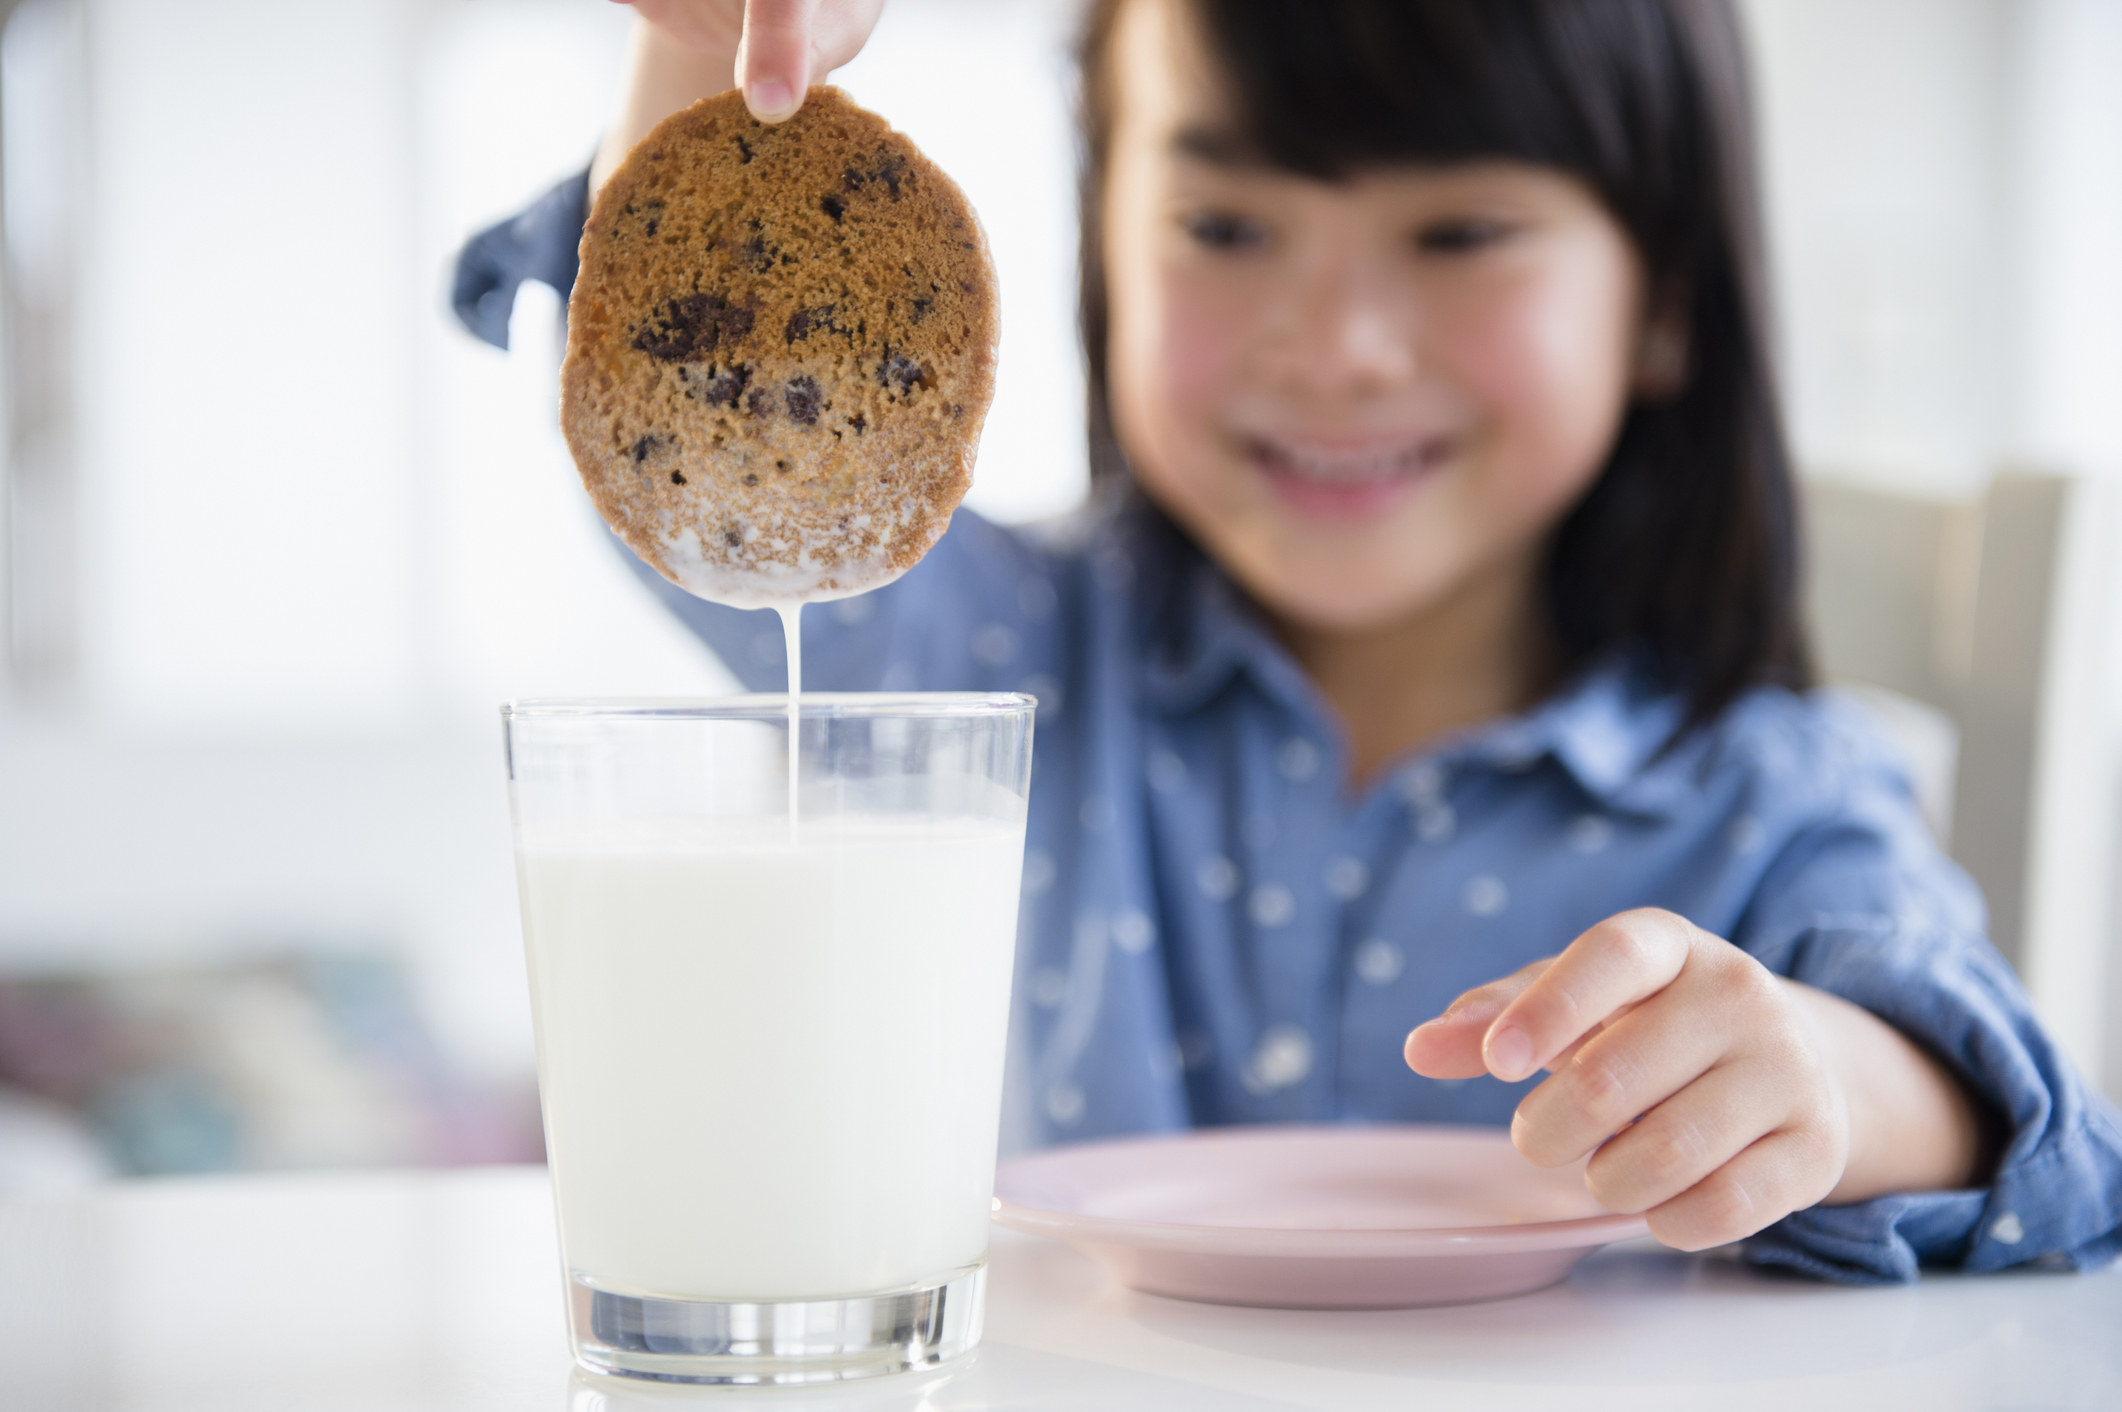 A photo of a girl at a dining table holding a cookie above a glass of milk she has just dunked in